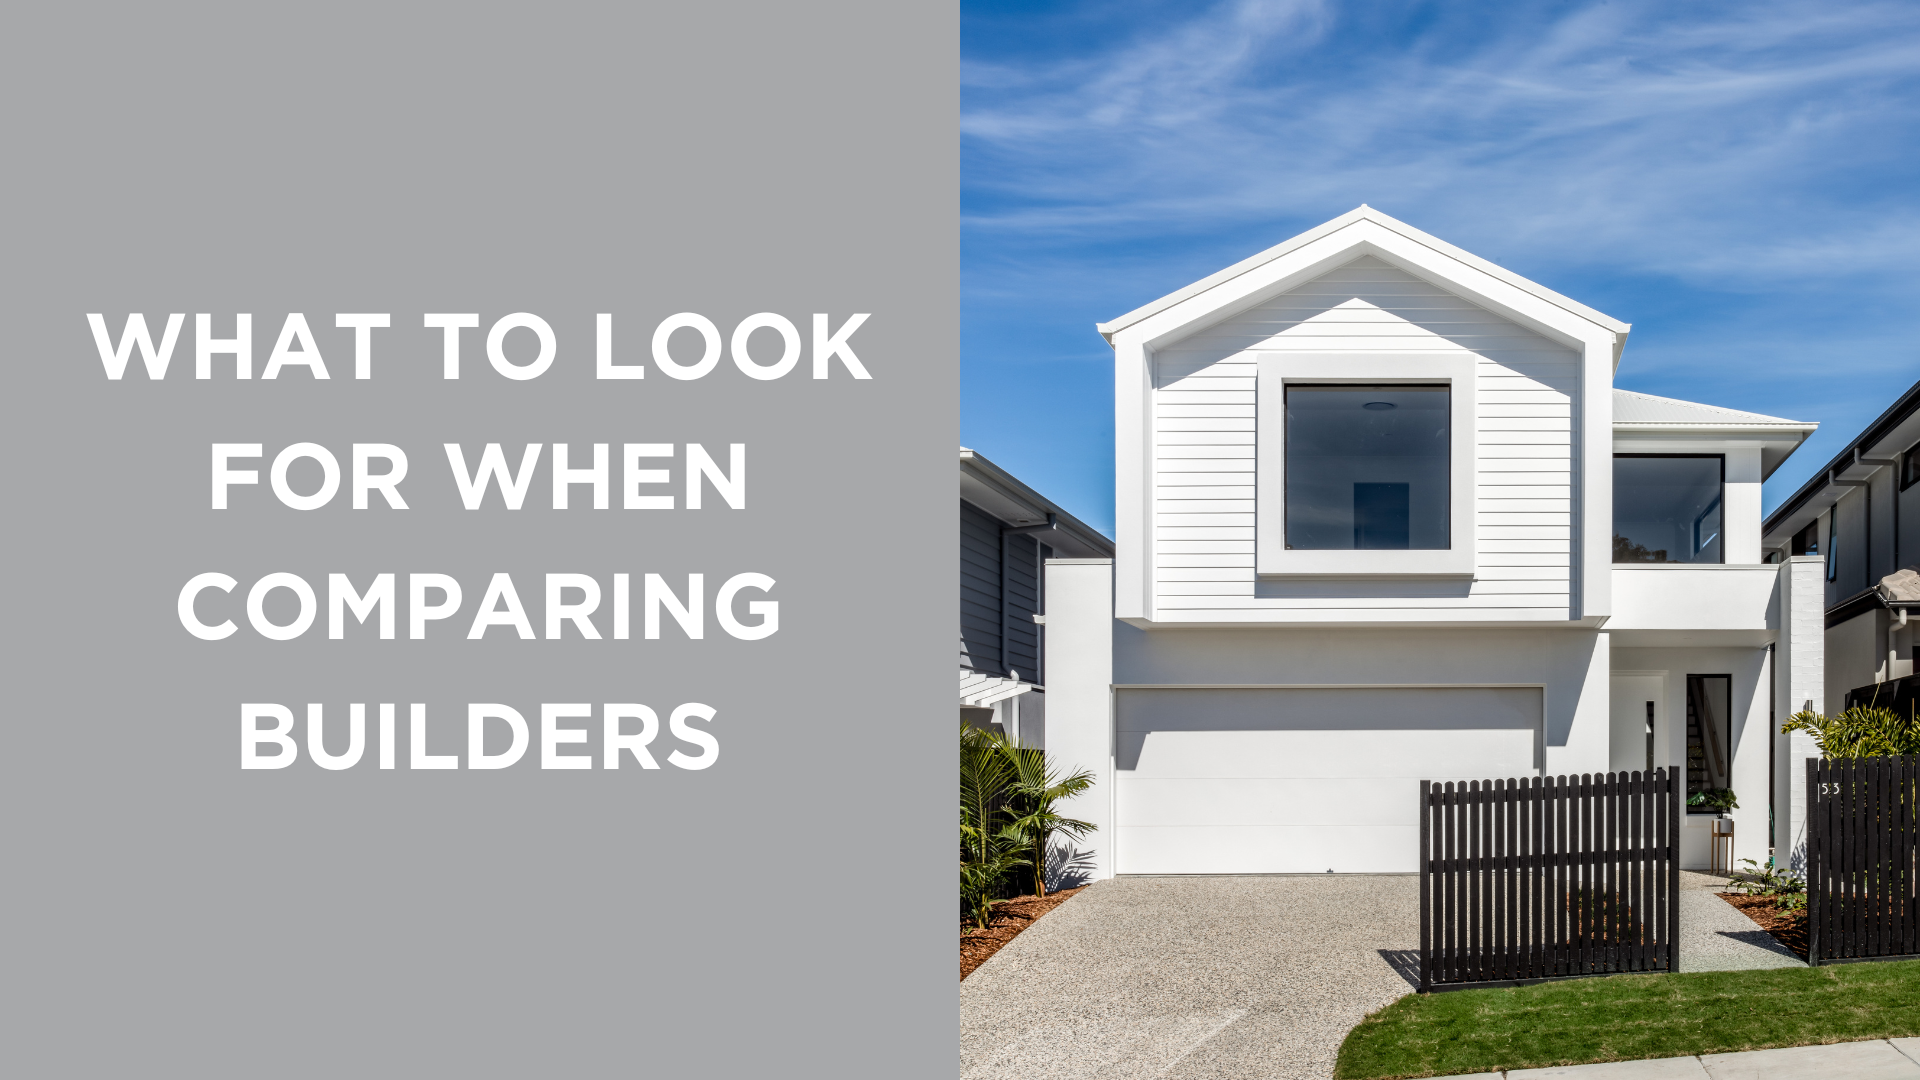 What to look for when comparing builders